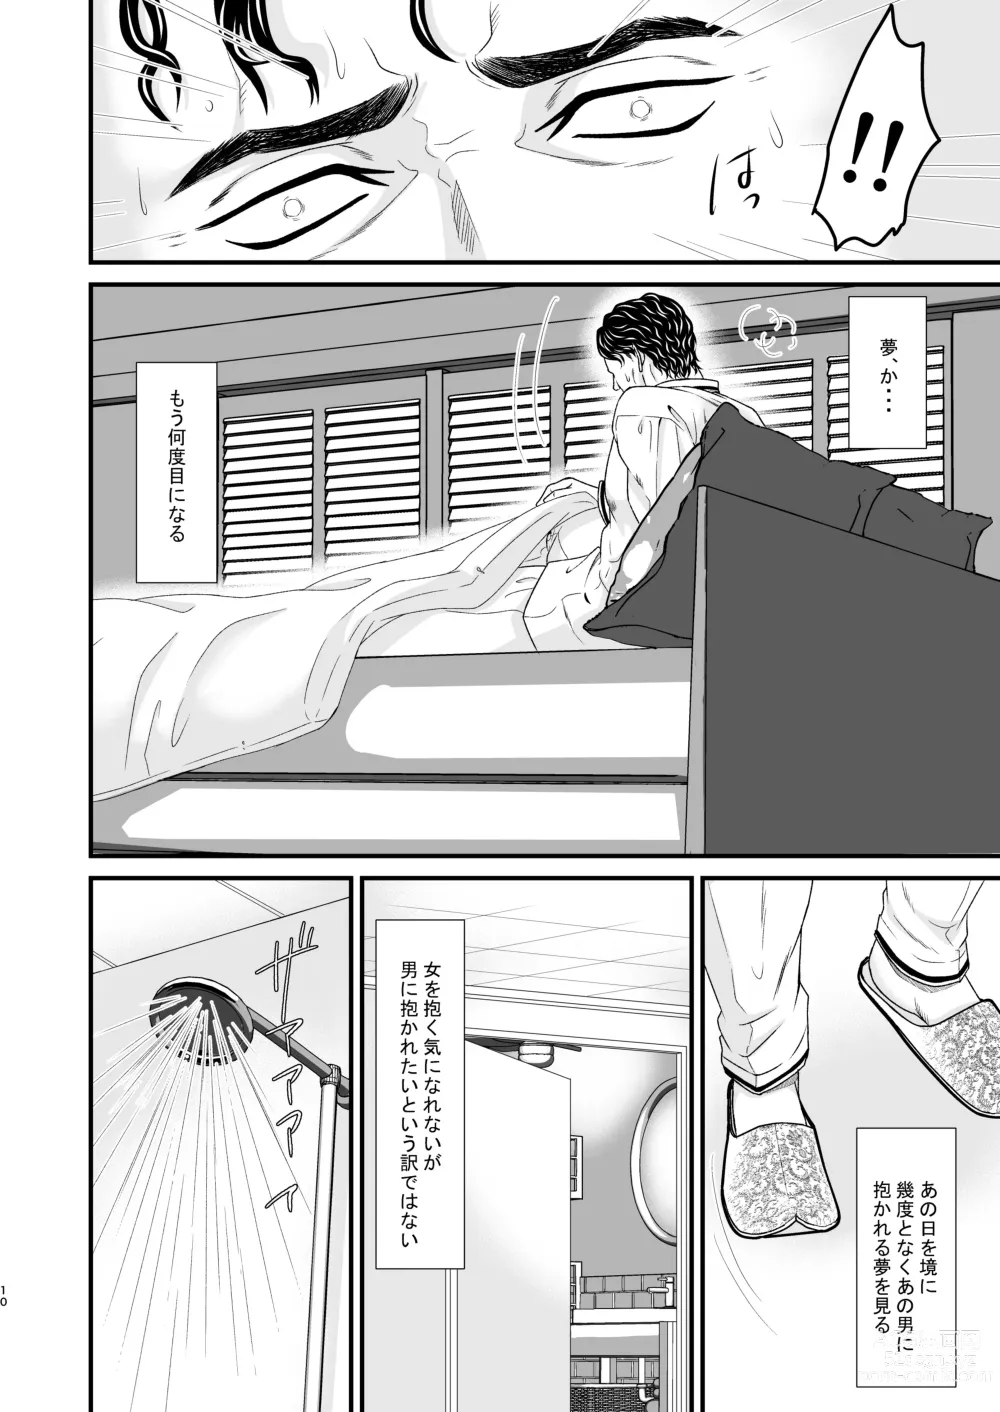 Page 9 of doujinshi Confusion